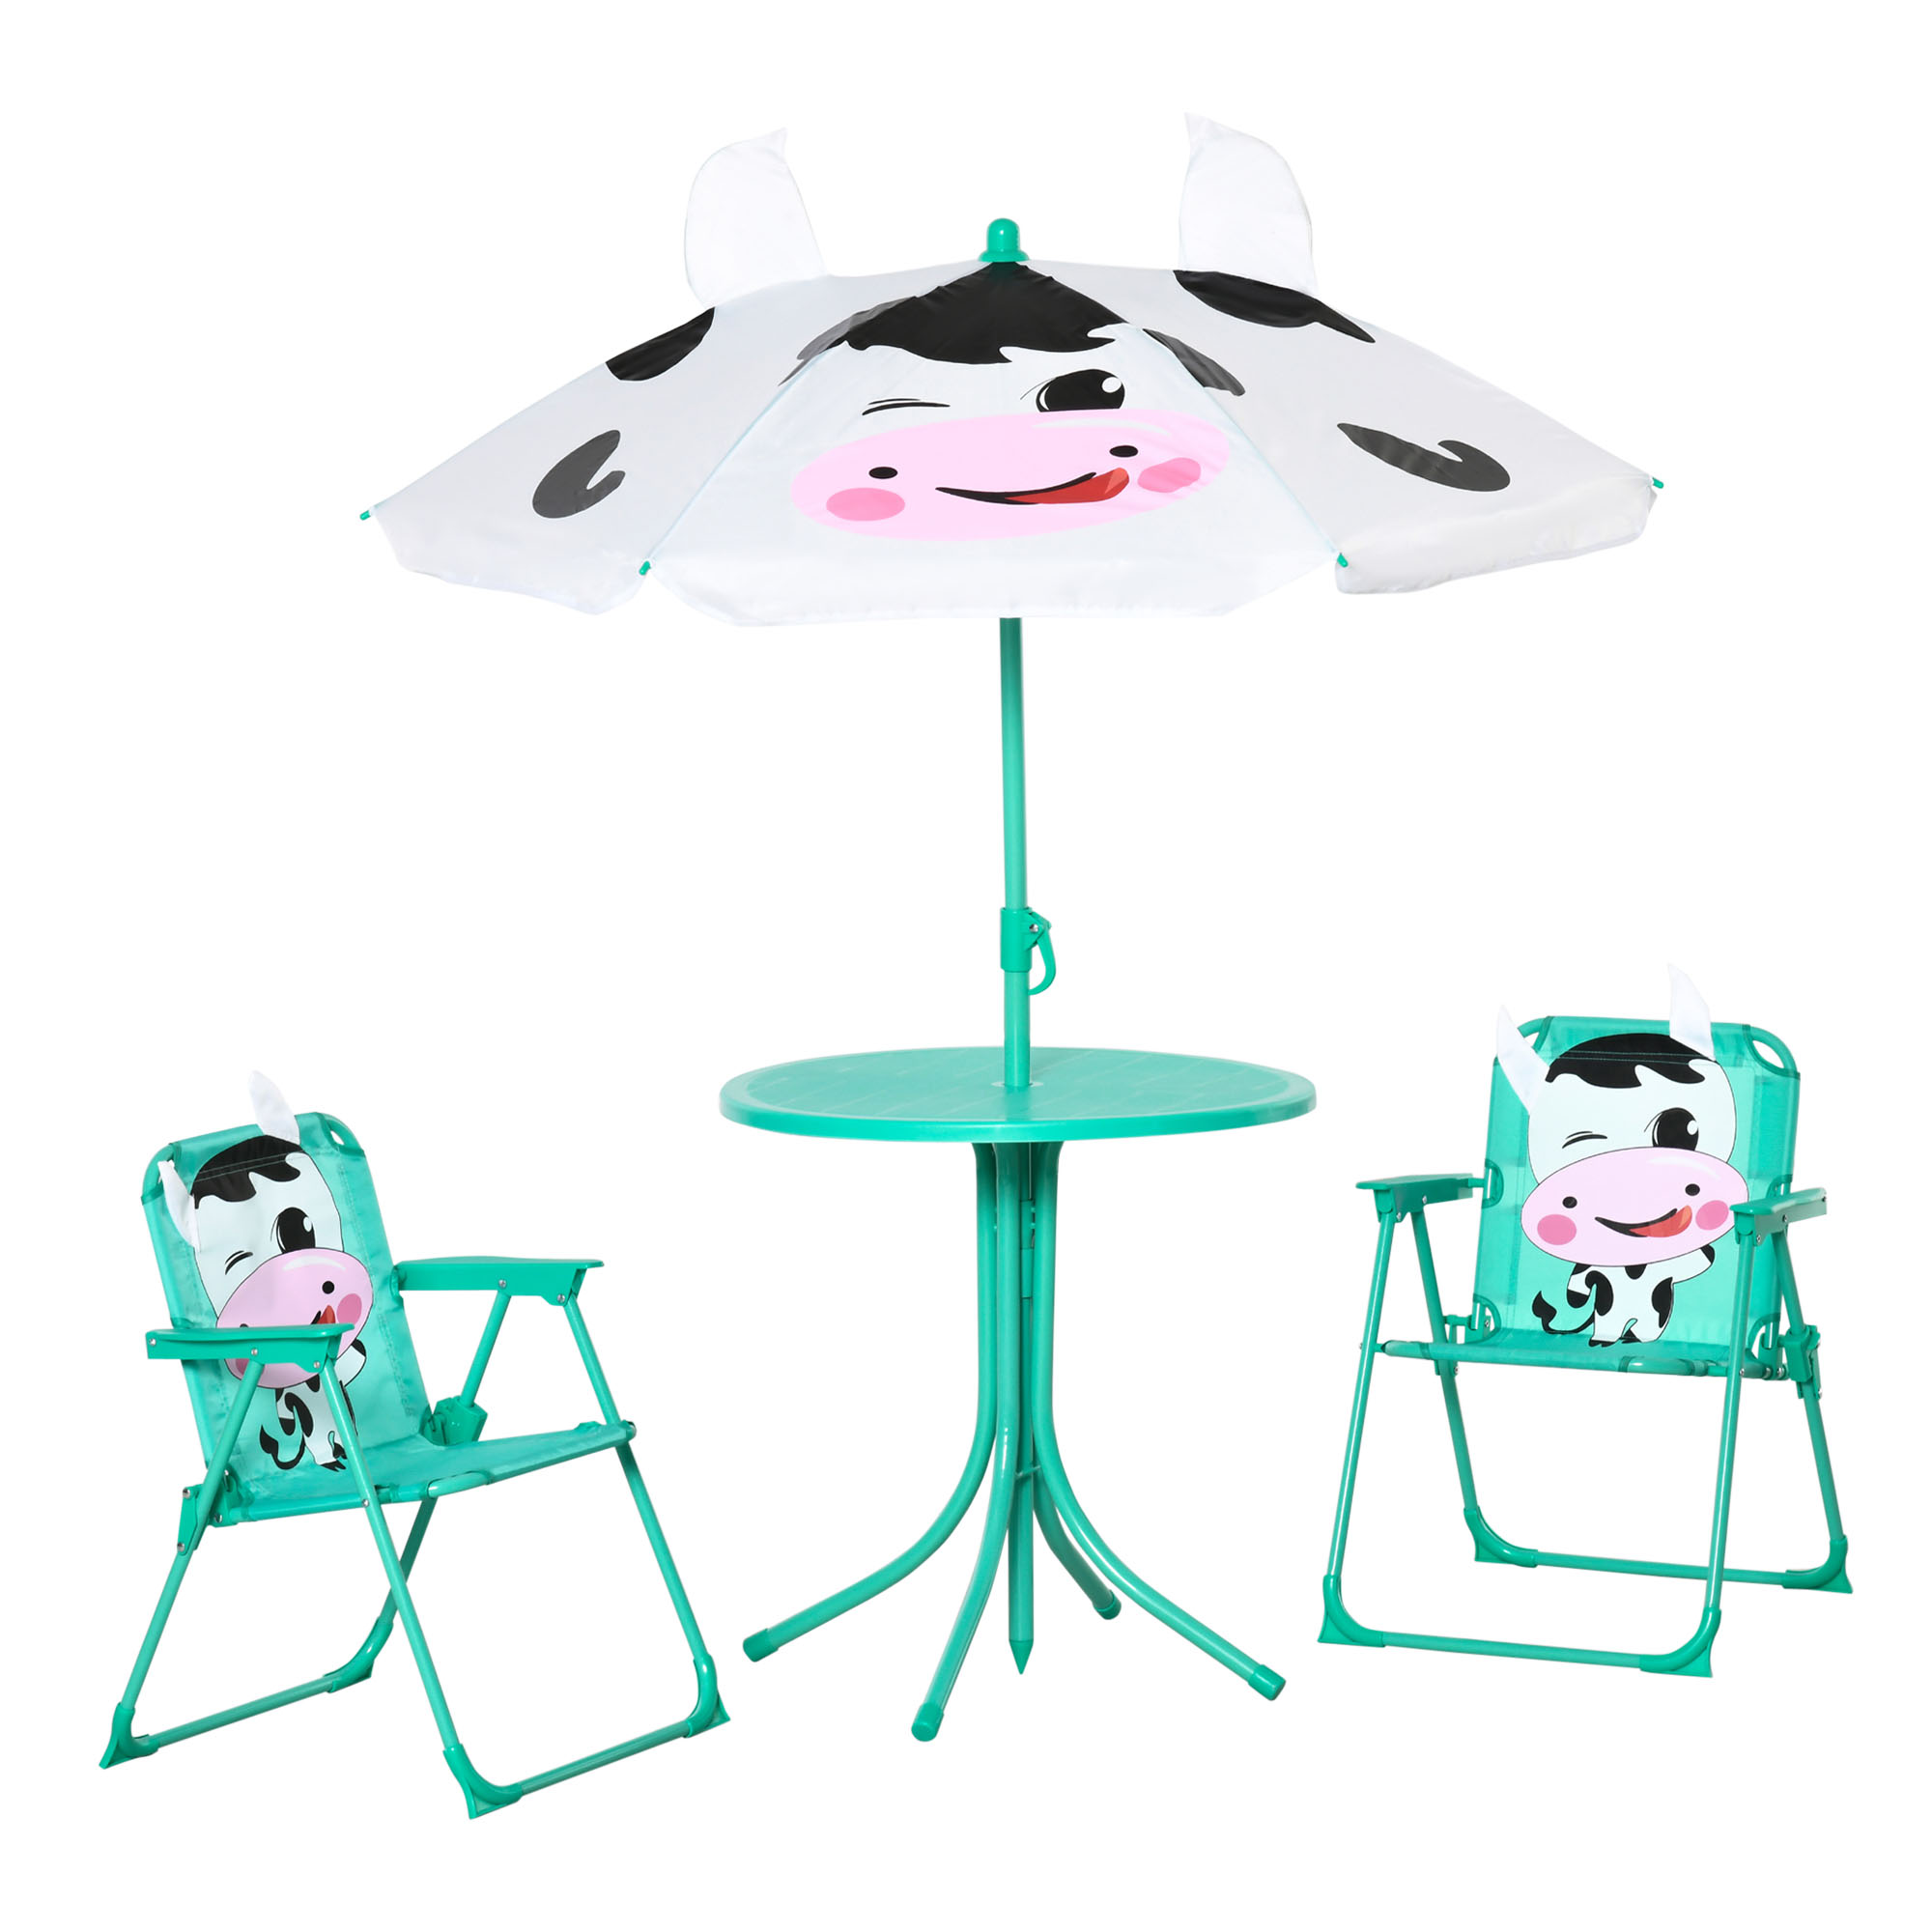 Outsunny Kids Table and Chair Set, Outdoor Folding Garden Furniture, for Patio Backyard, with Dairy Cow Pattern, Removable & Height Adjustable Sun Umbrella, Aged 3-6 Years Old